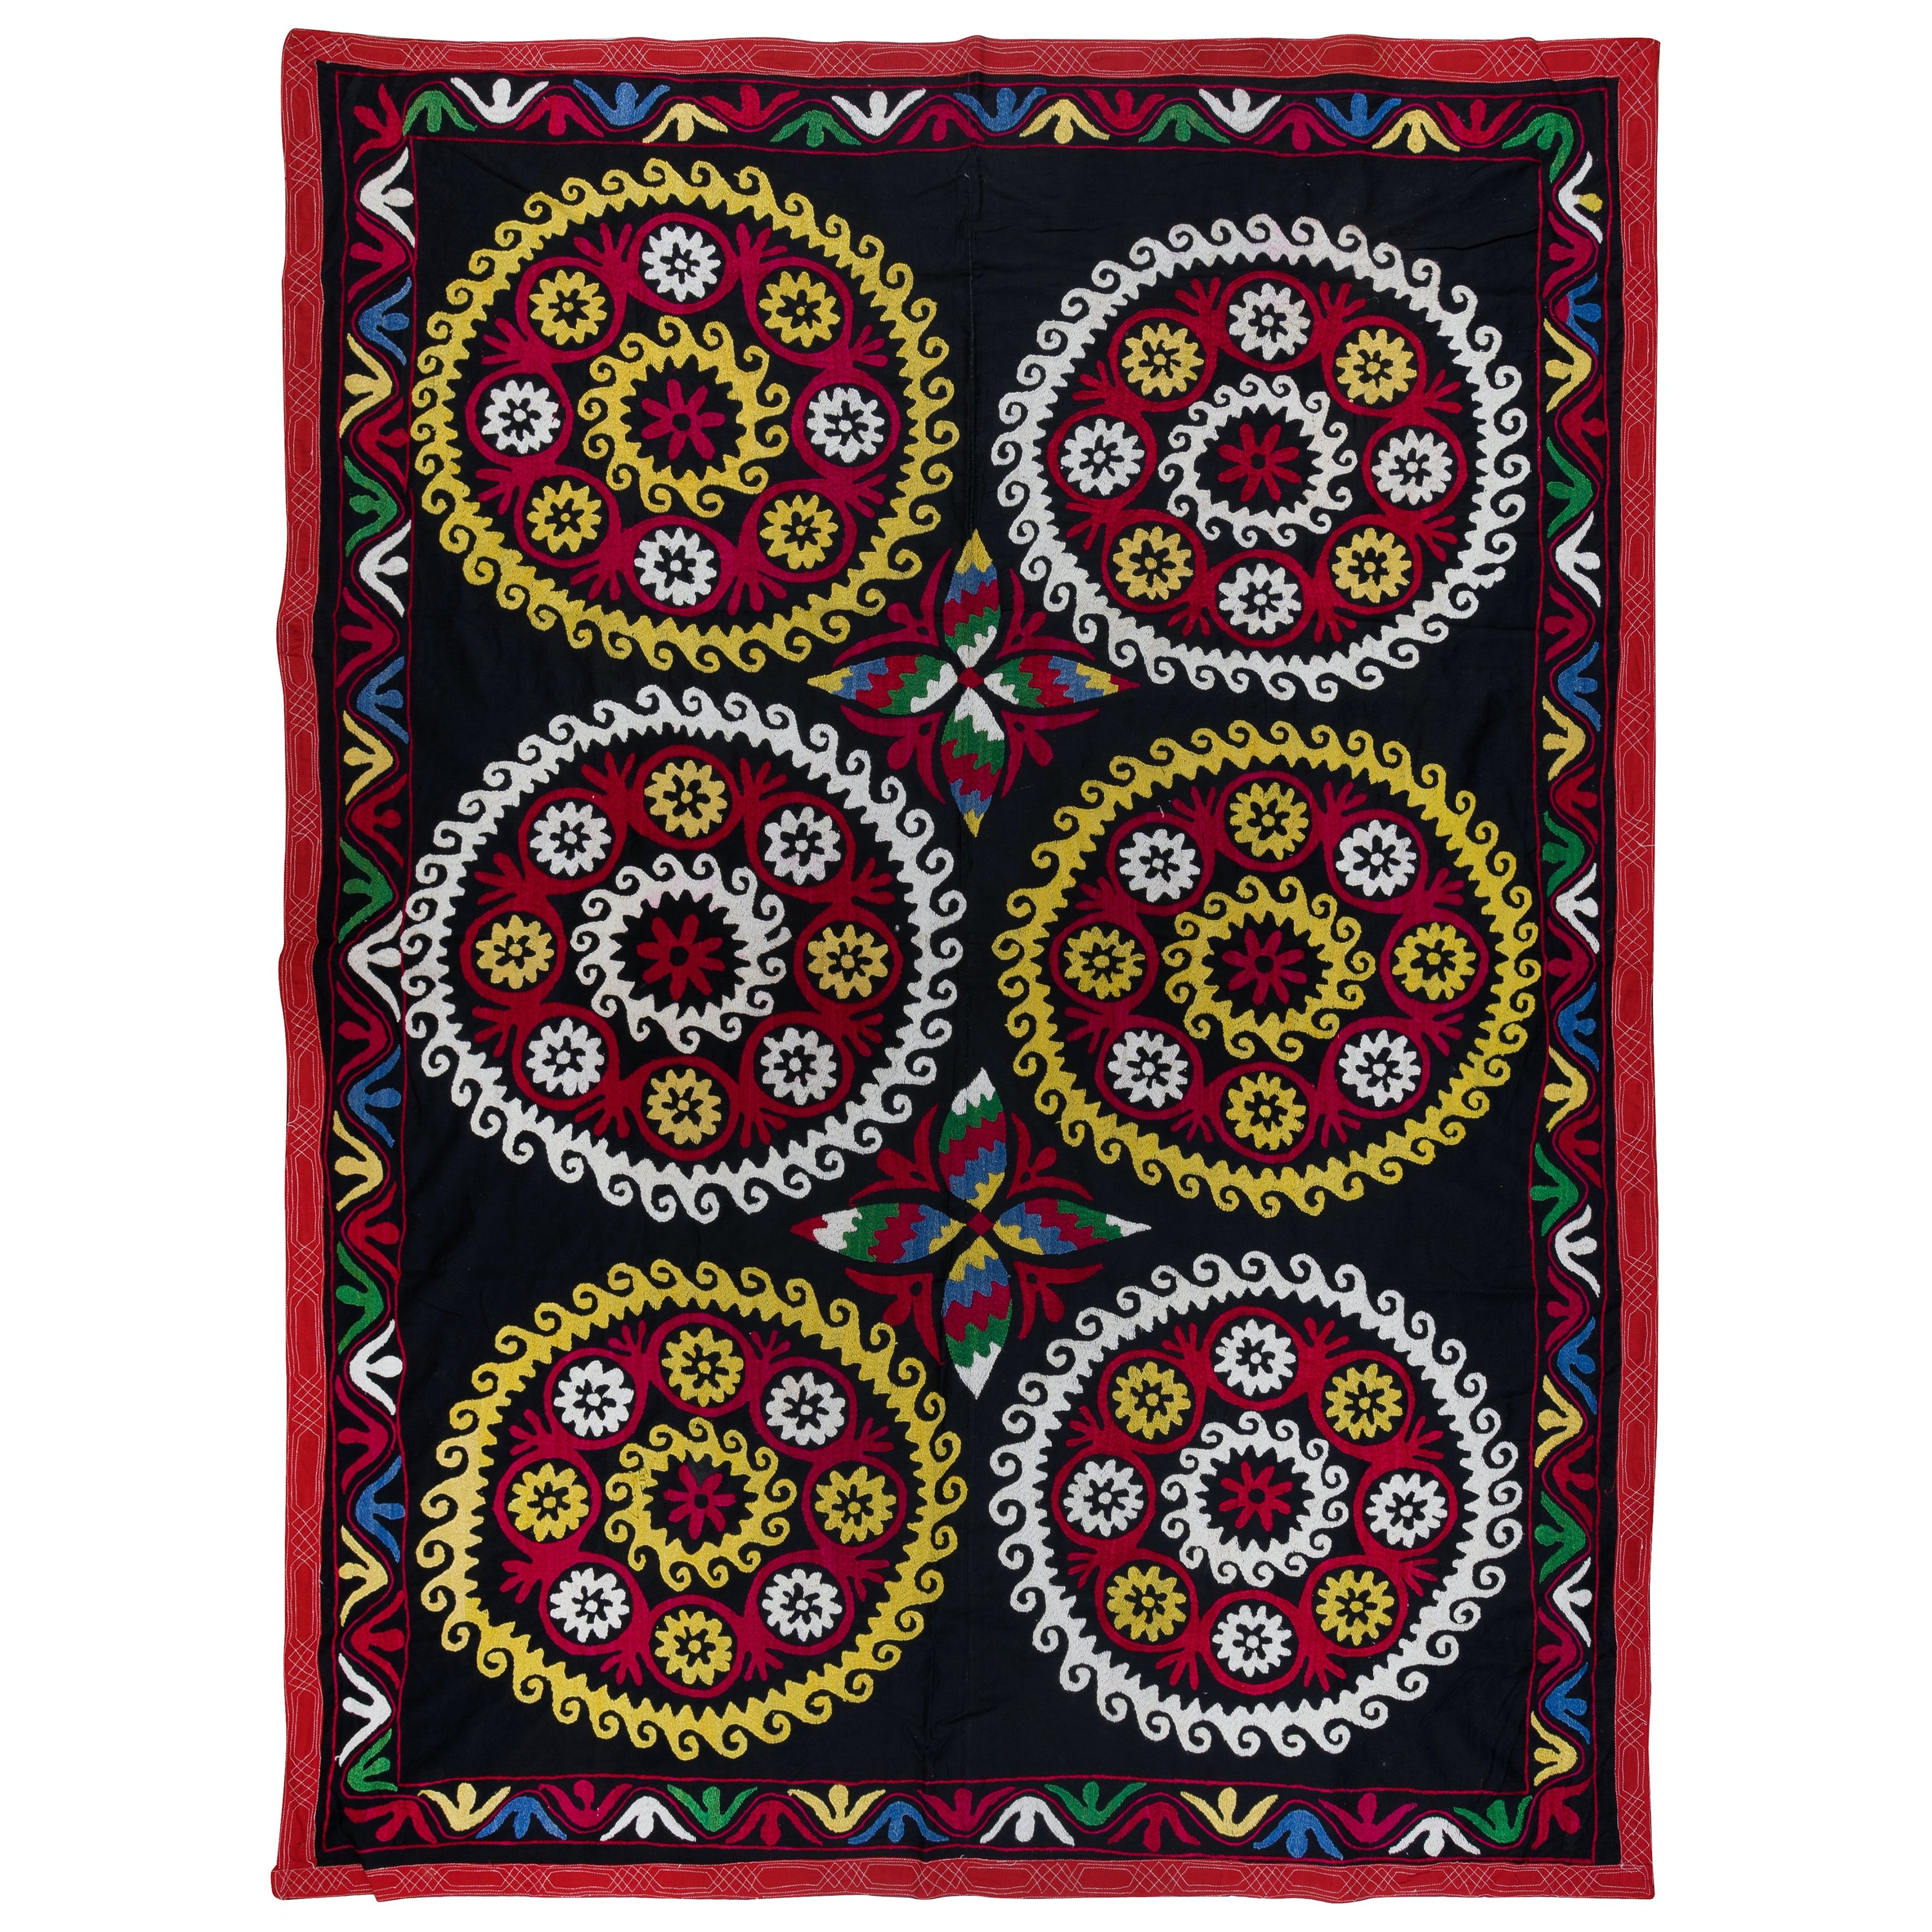 5x6.6 ft Colorful Silk Hand Embroidery Wall Hanging, Old Suzani Fabric Bedspread For Sale